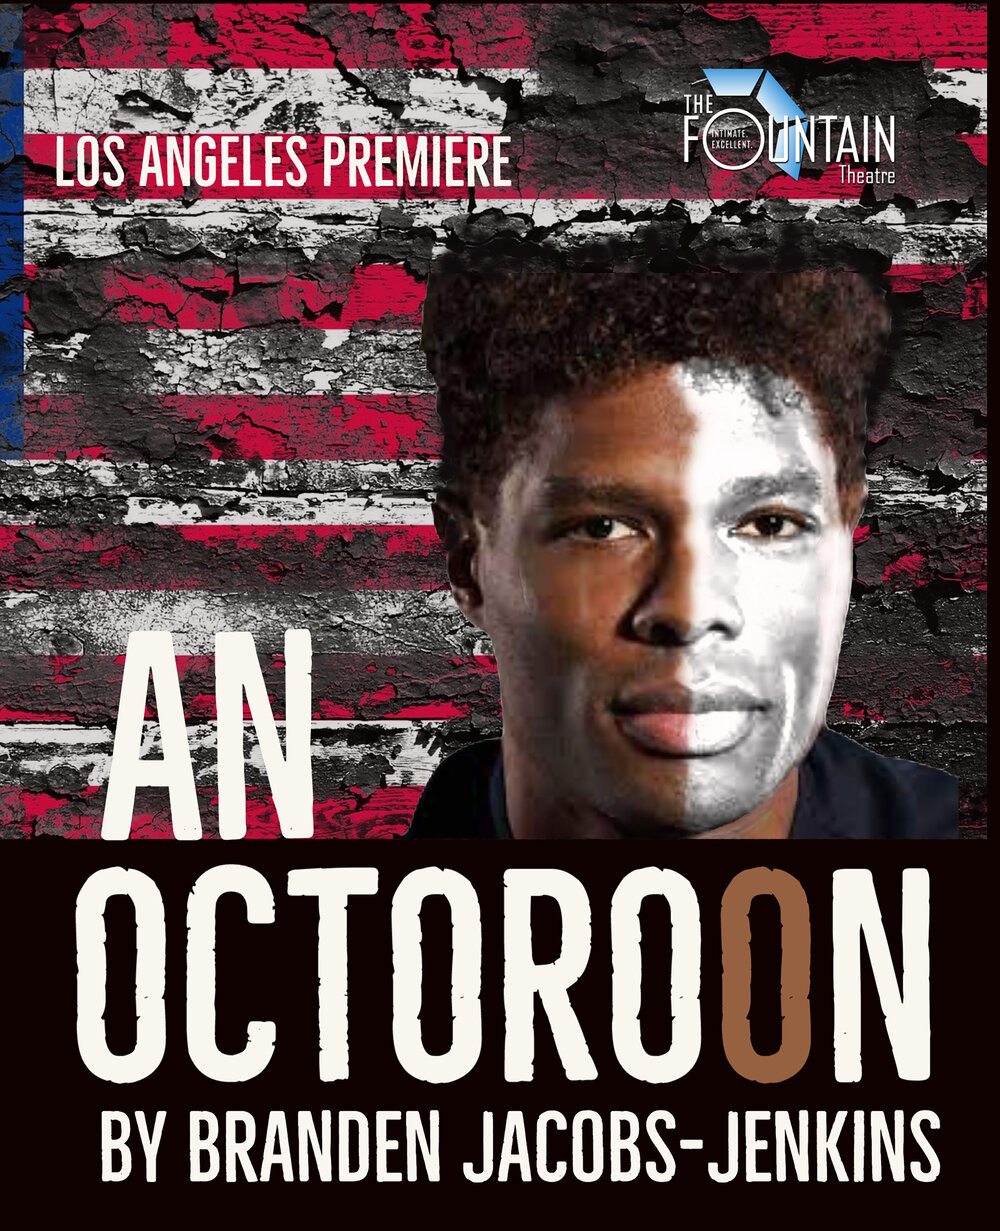 what is the genre of the octoroon